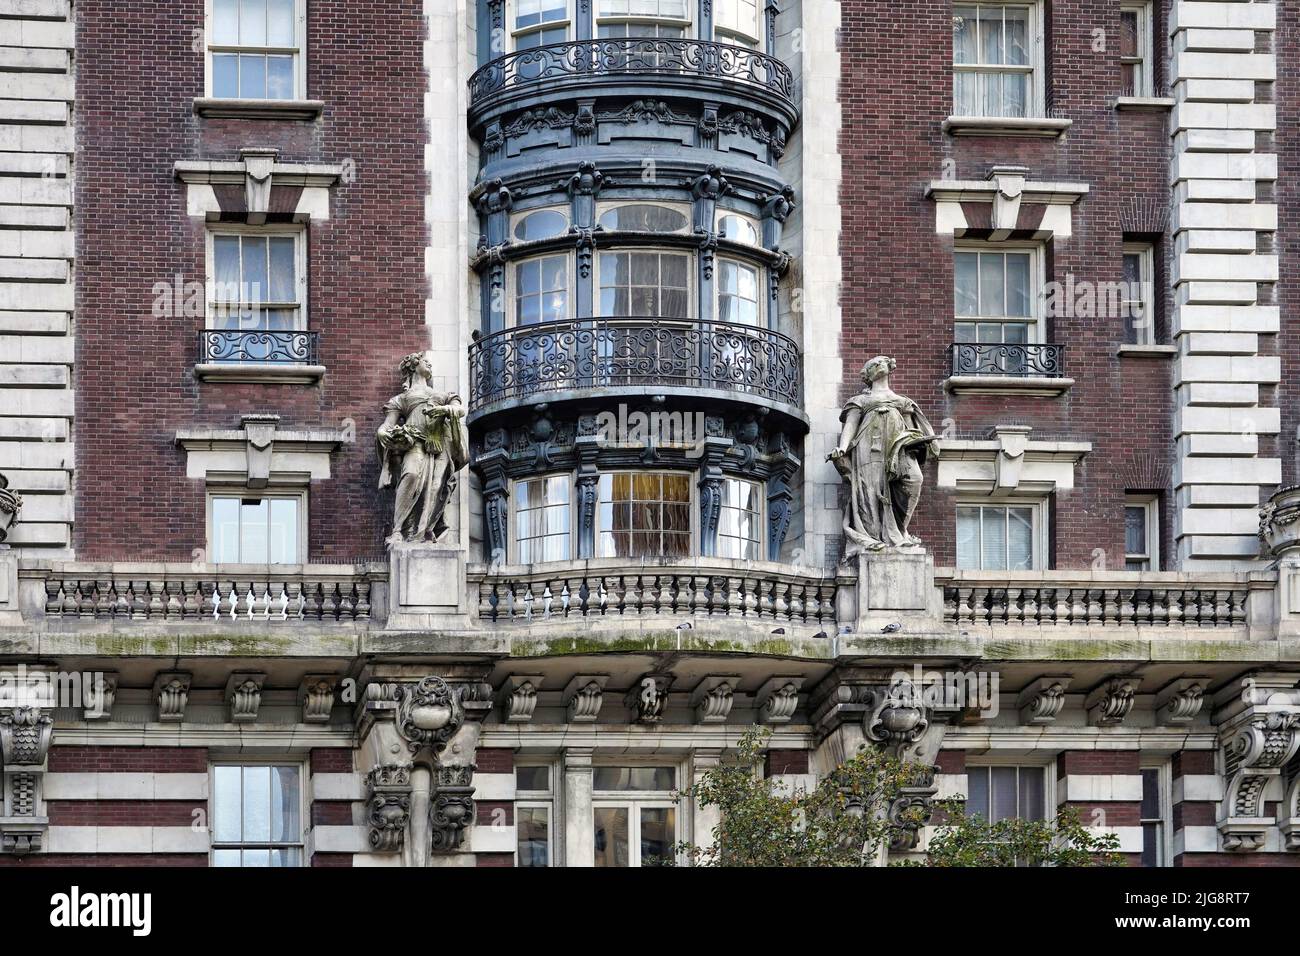 Facade of the Dorilton, a baroque style Manhattan apartment building with ornate decorative stone carving and bow window Stock Photo